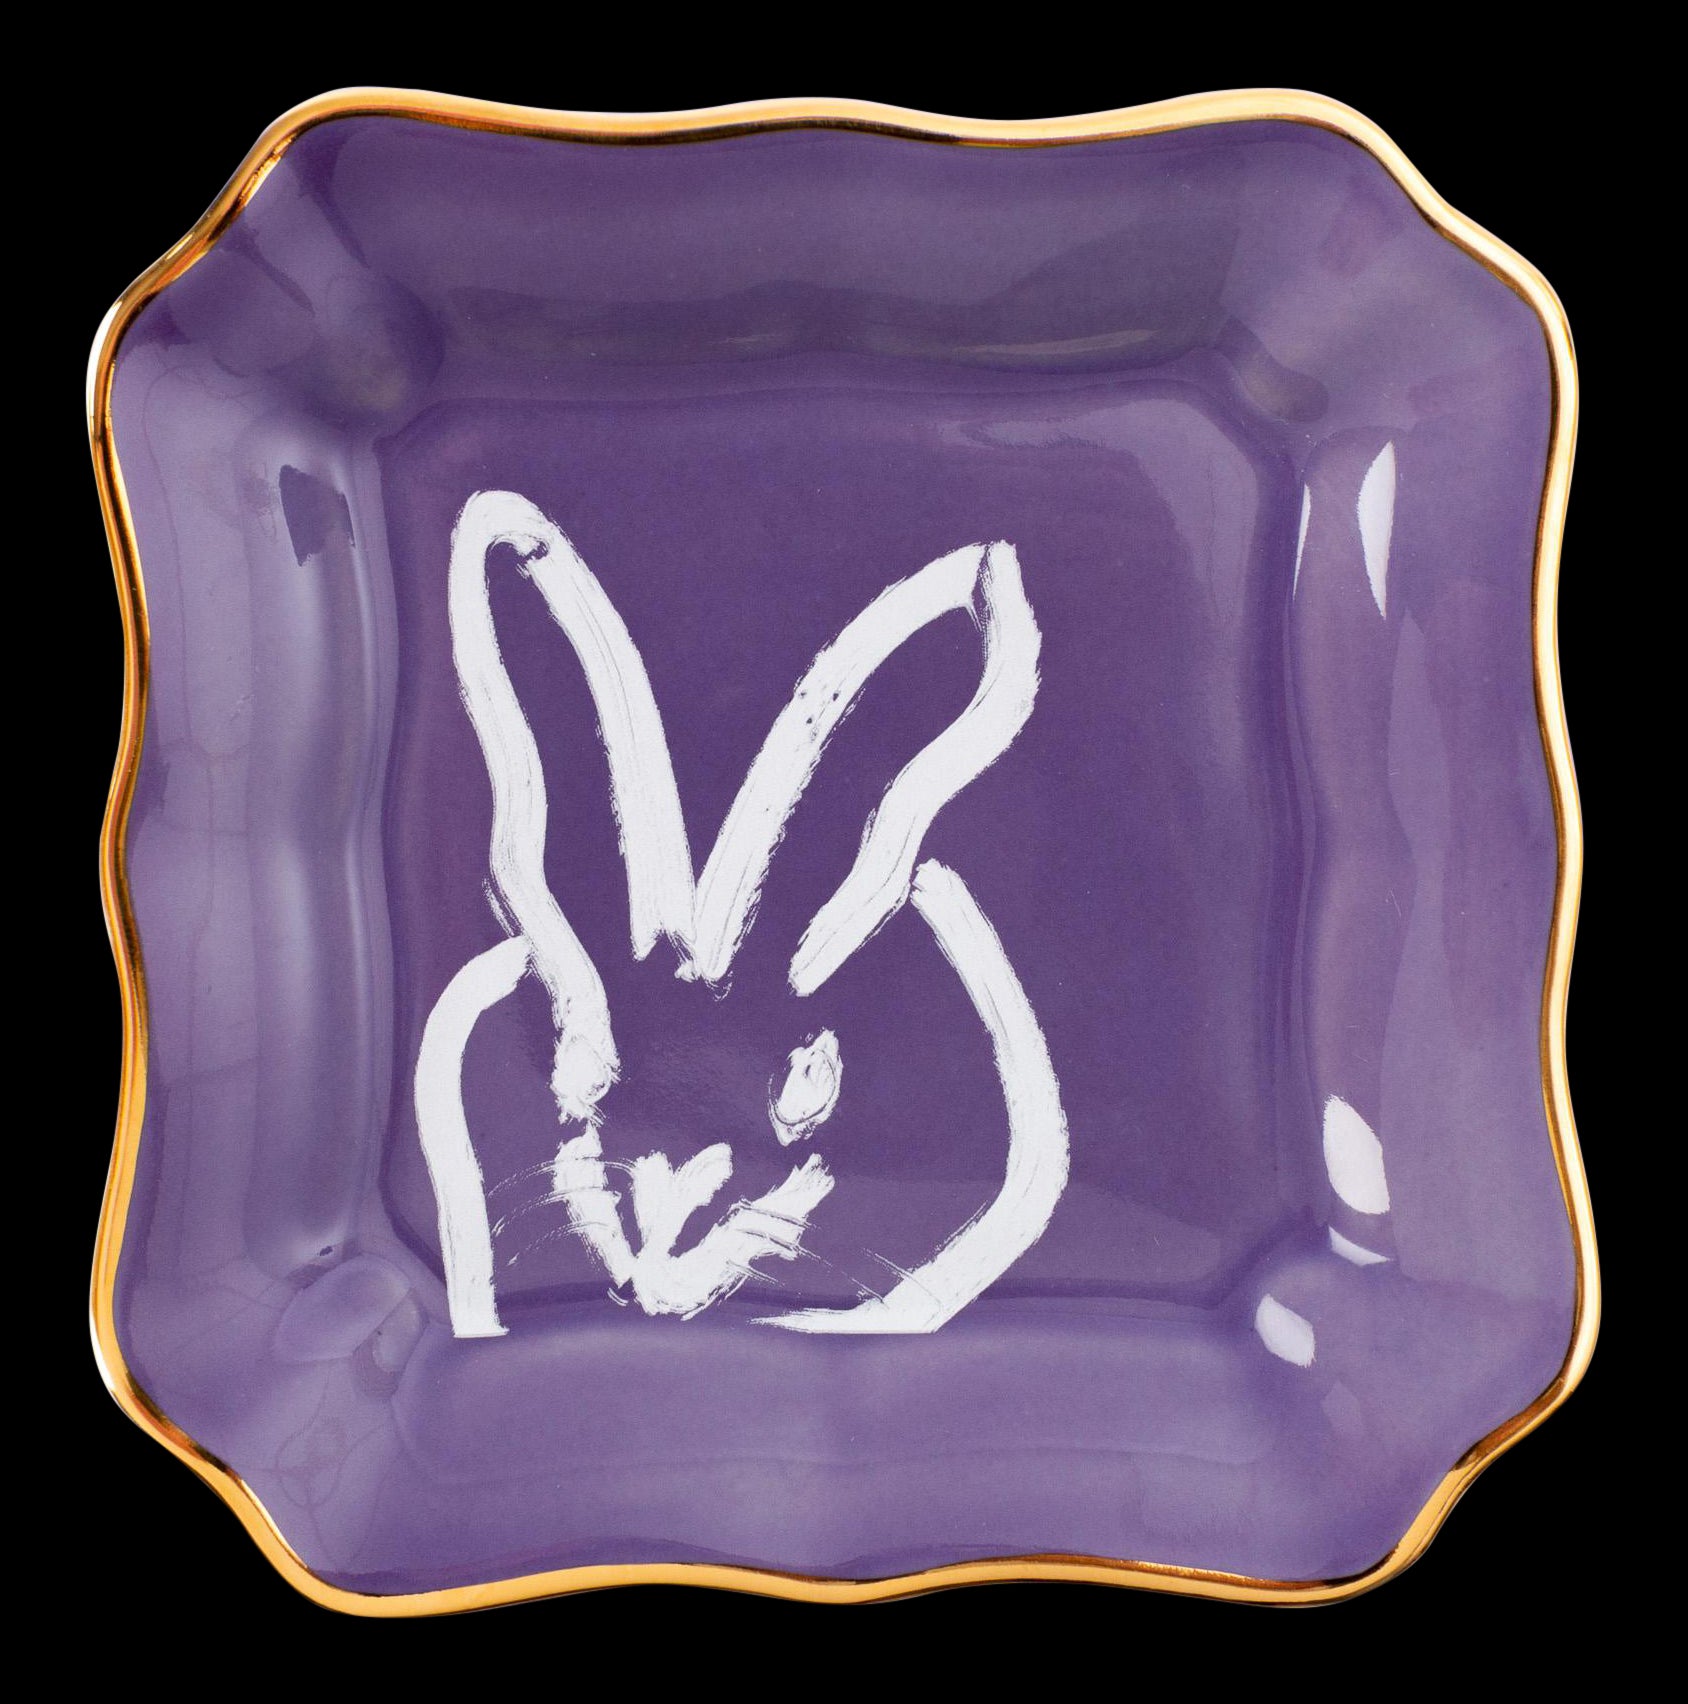 Bunny Portrait Plates: Lilac with Gold